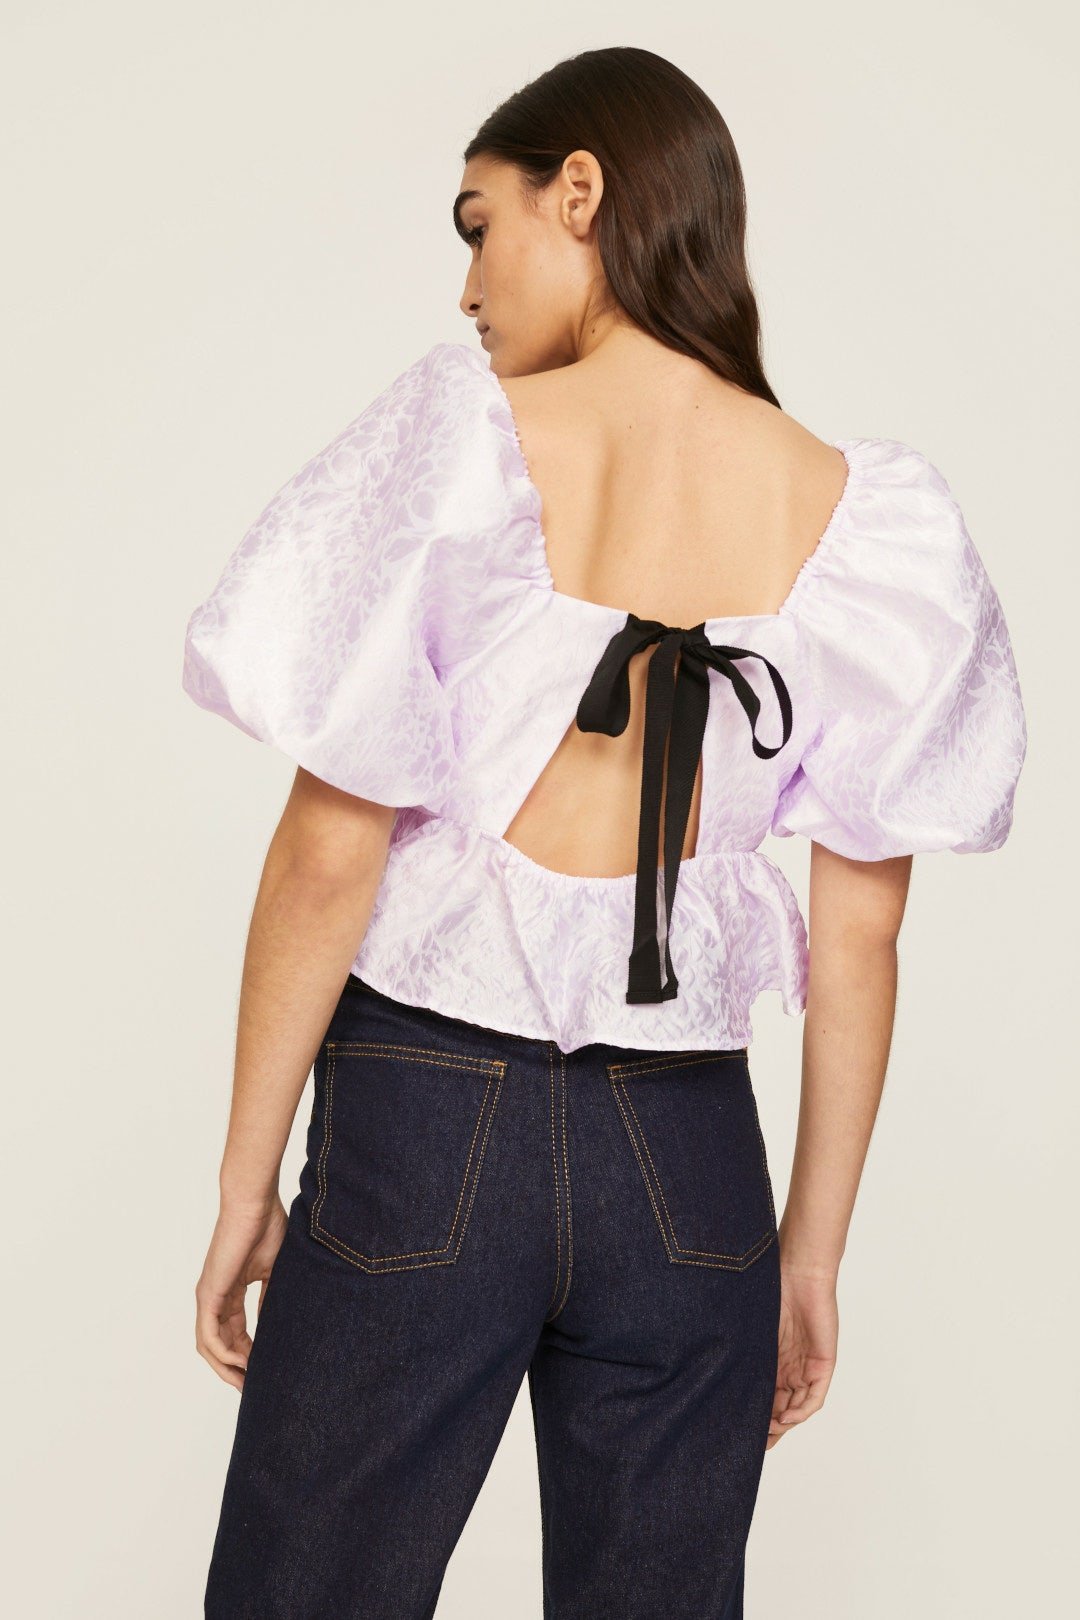 jacquard crop top bow tie back rent the runway